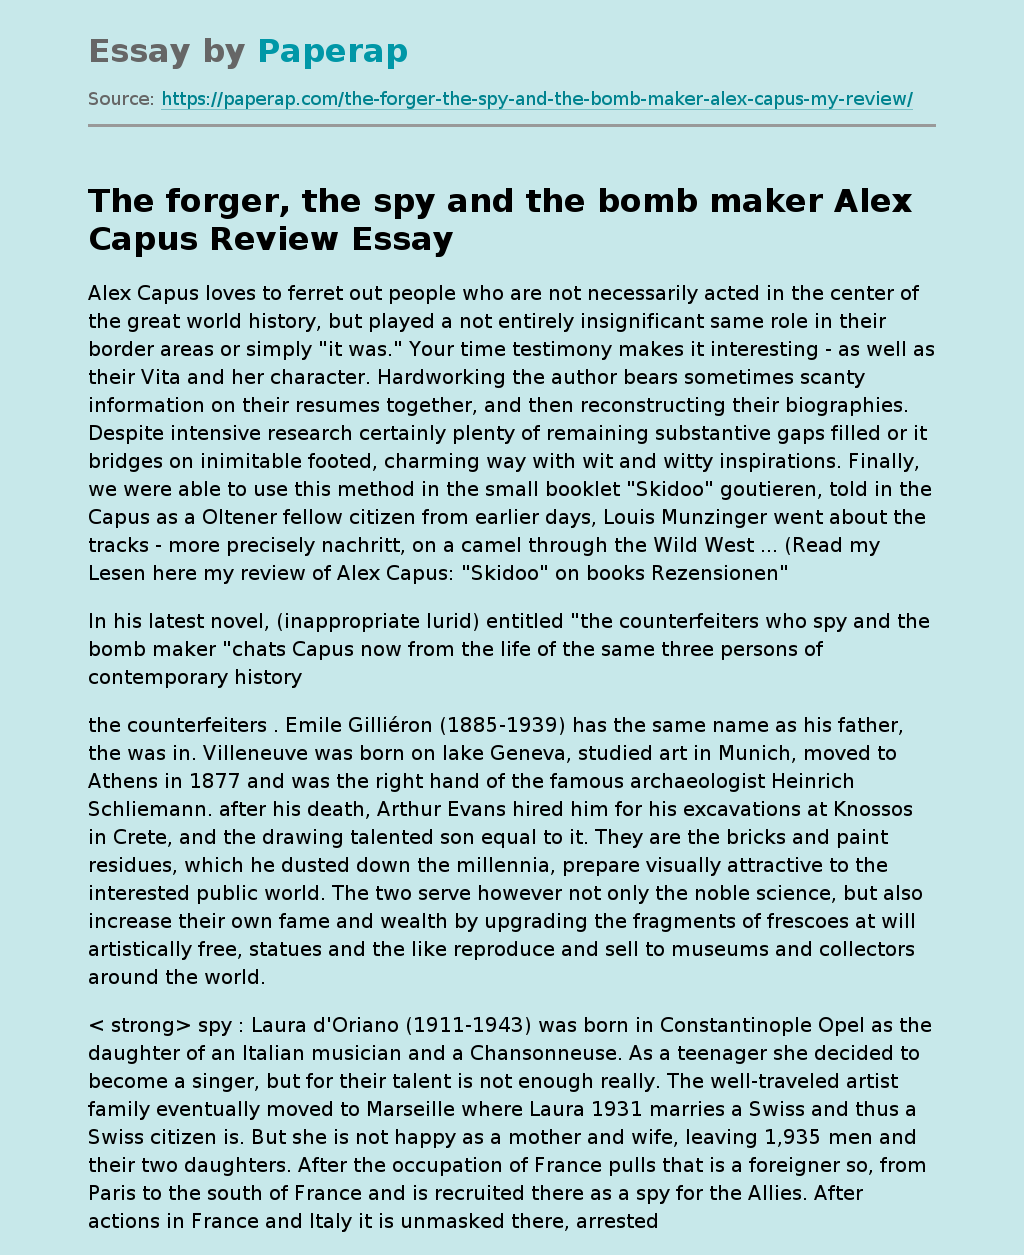 The Forger, the Spy and the bomb Maker Alex Capus Review